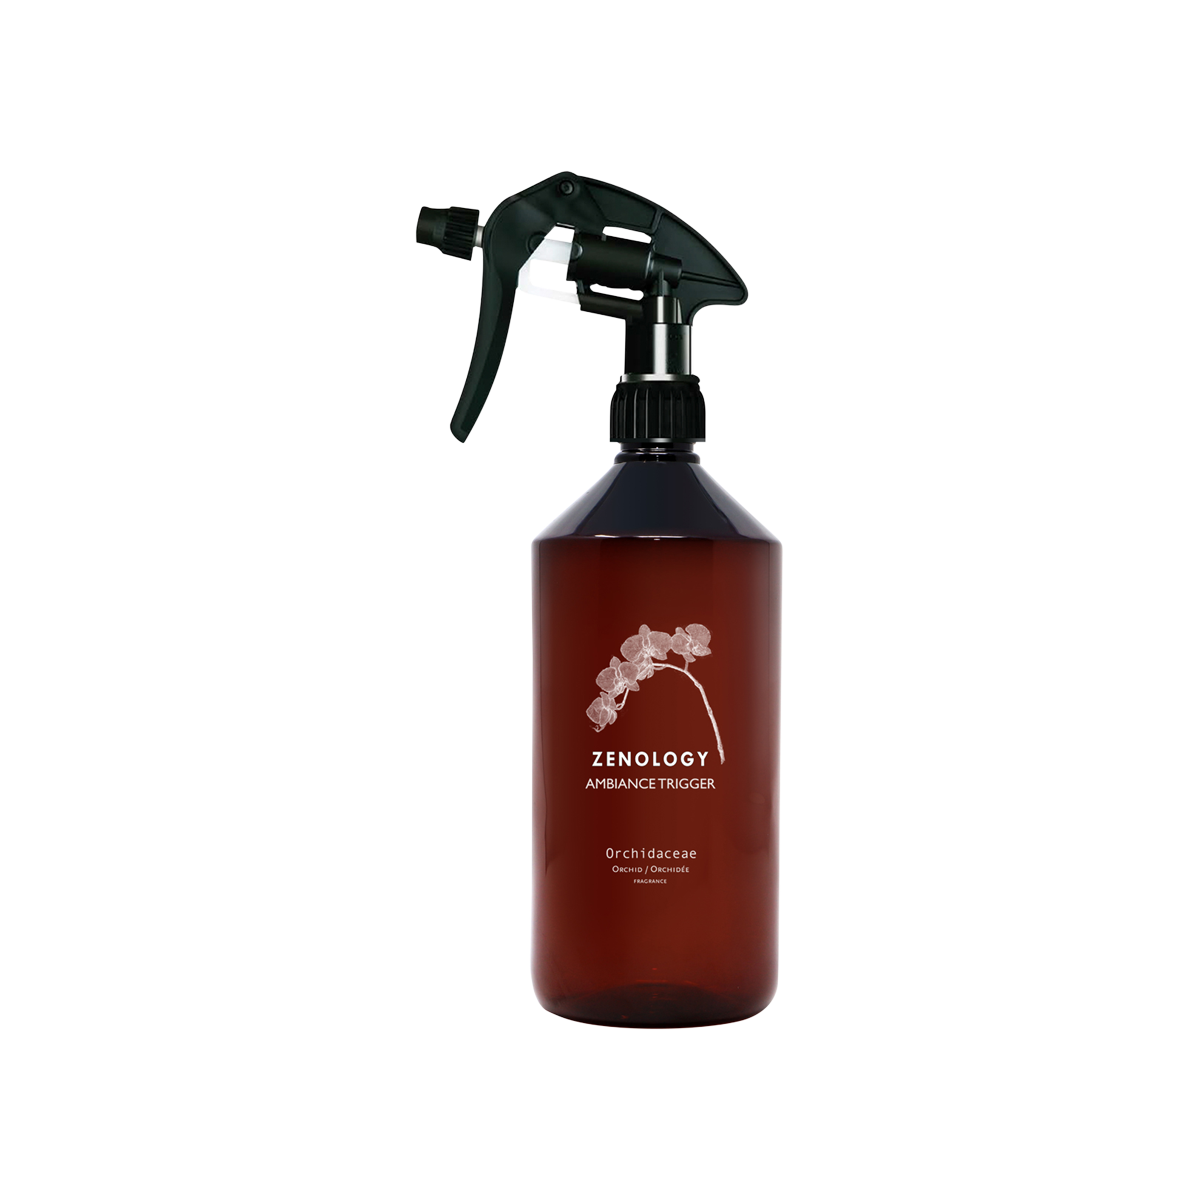 Zenology - Orchidaceae Ambiance Trigger Spray